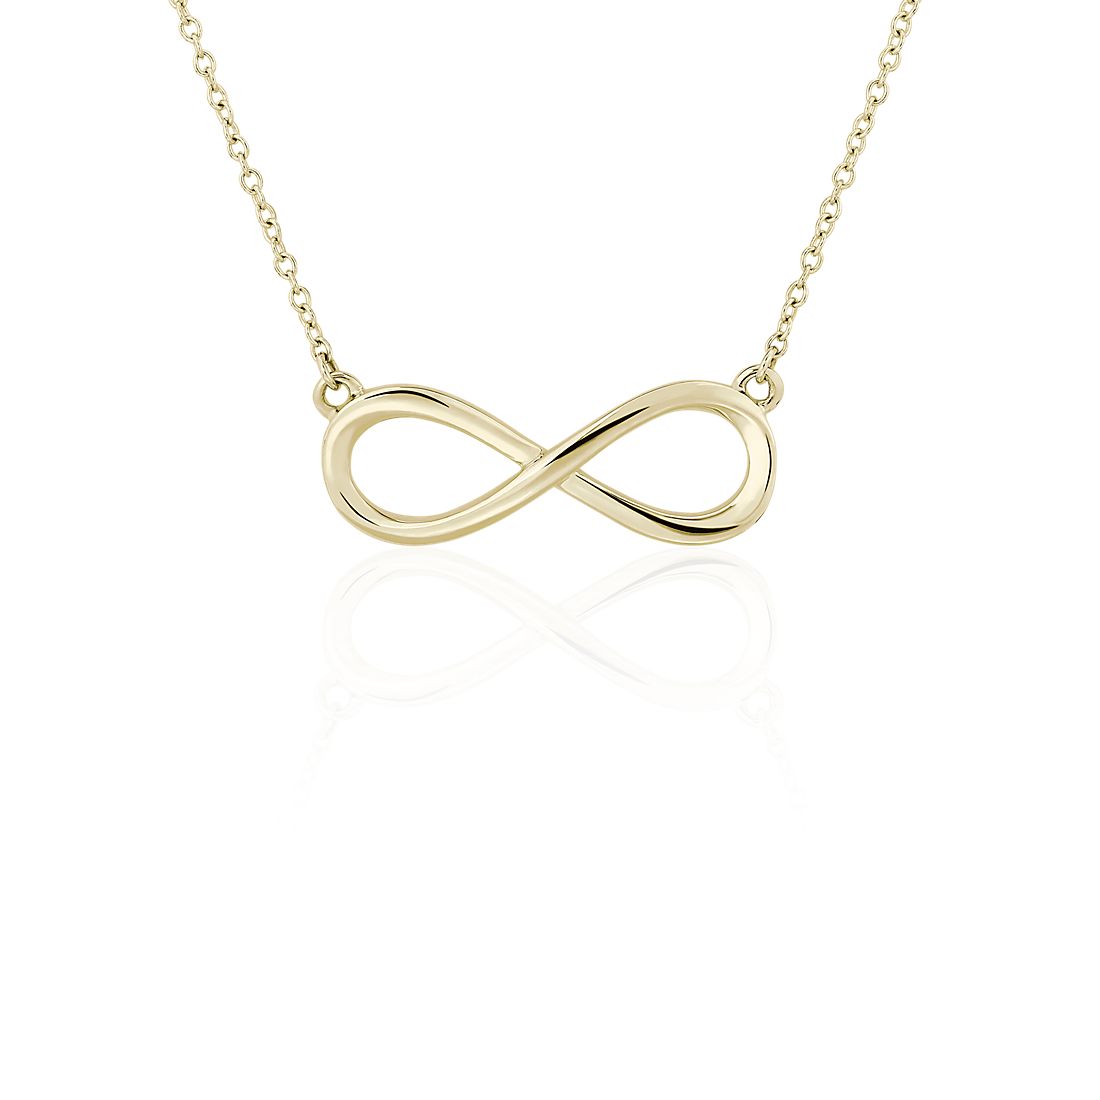 Best Friend Necklace Love Necklace Gold Infinity Necklace 14 k Gold Infinity Necklace Girlfriend Necklace Infinity Jewelry